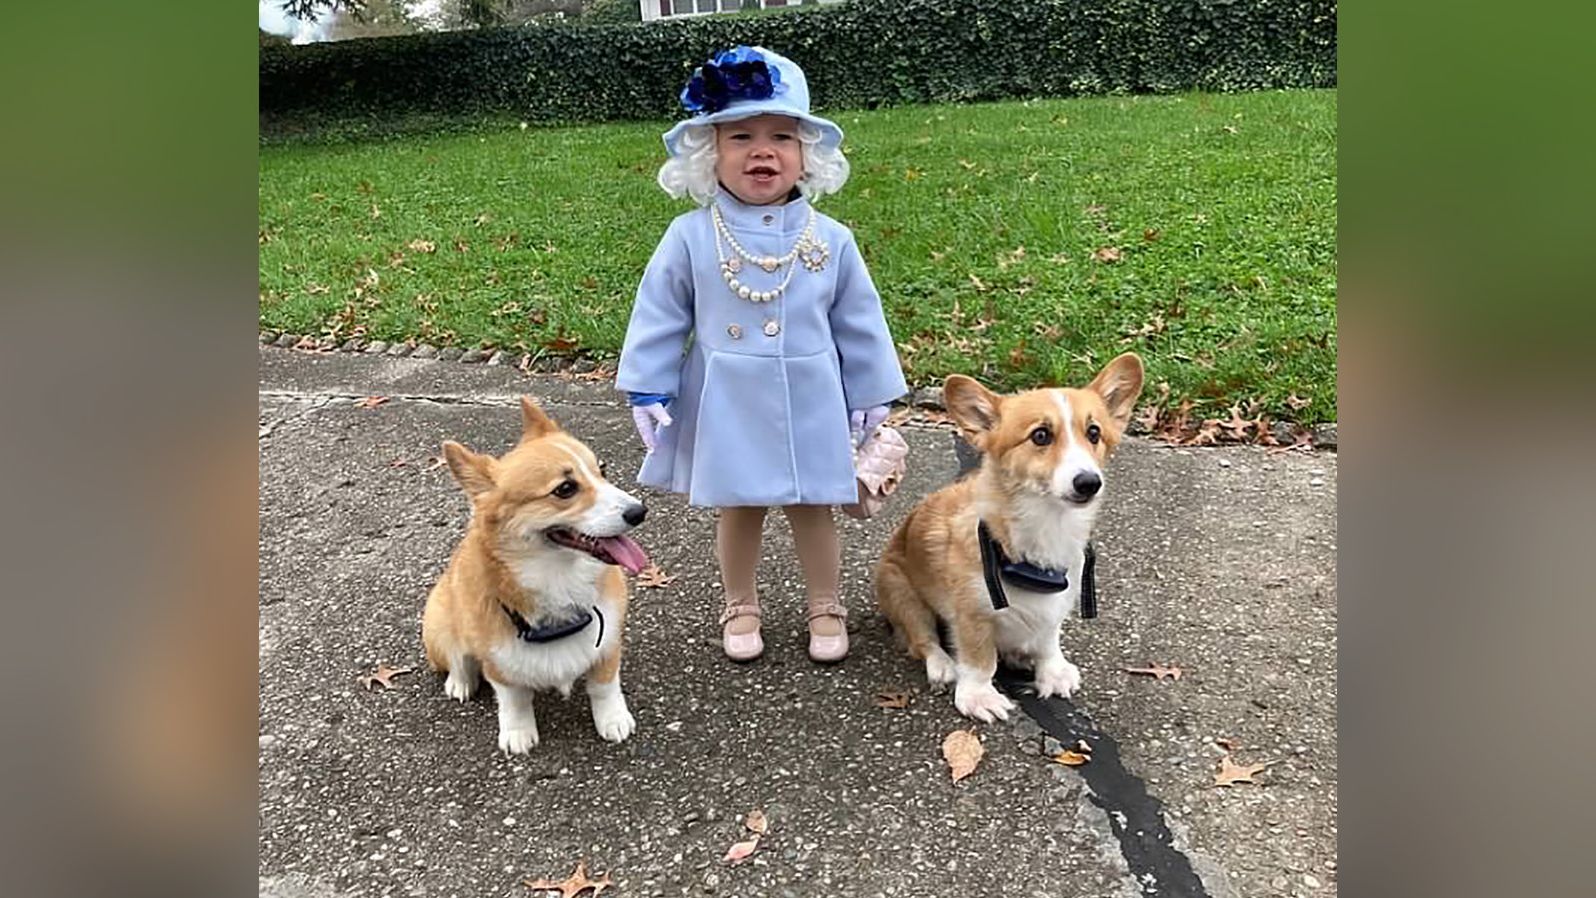 Jalayne Sutherland, accompanied by corgis Rascal and Jack, donned a royal outfit for Halloween.